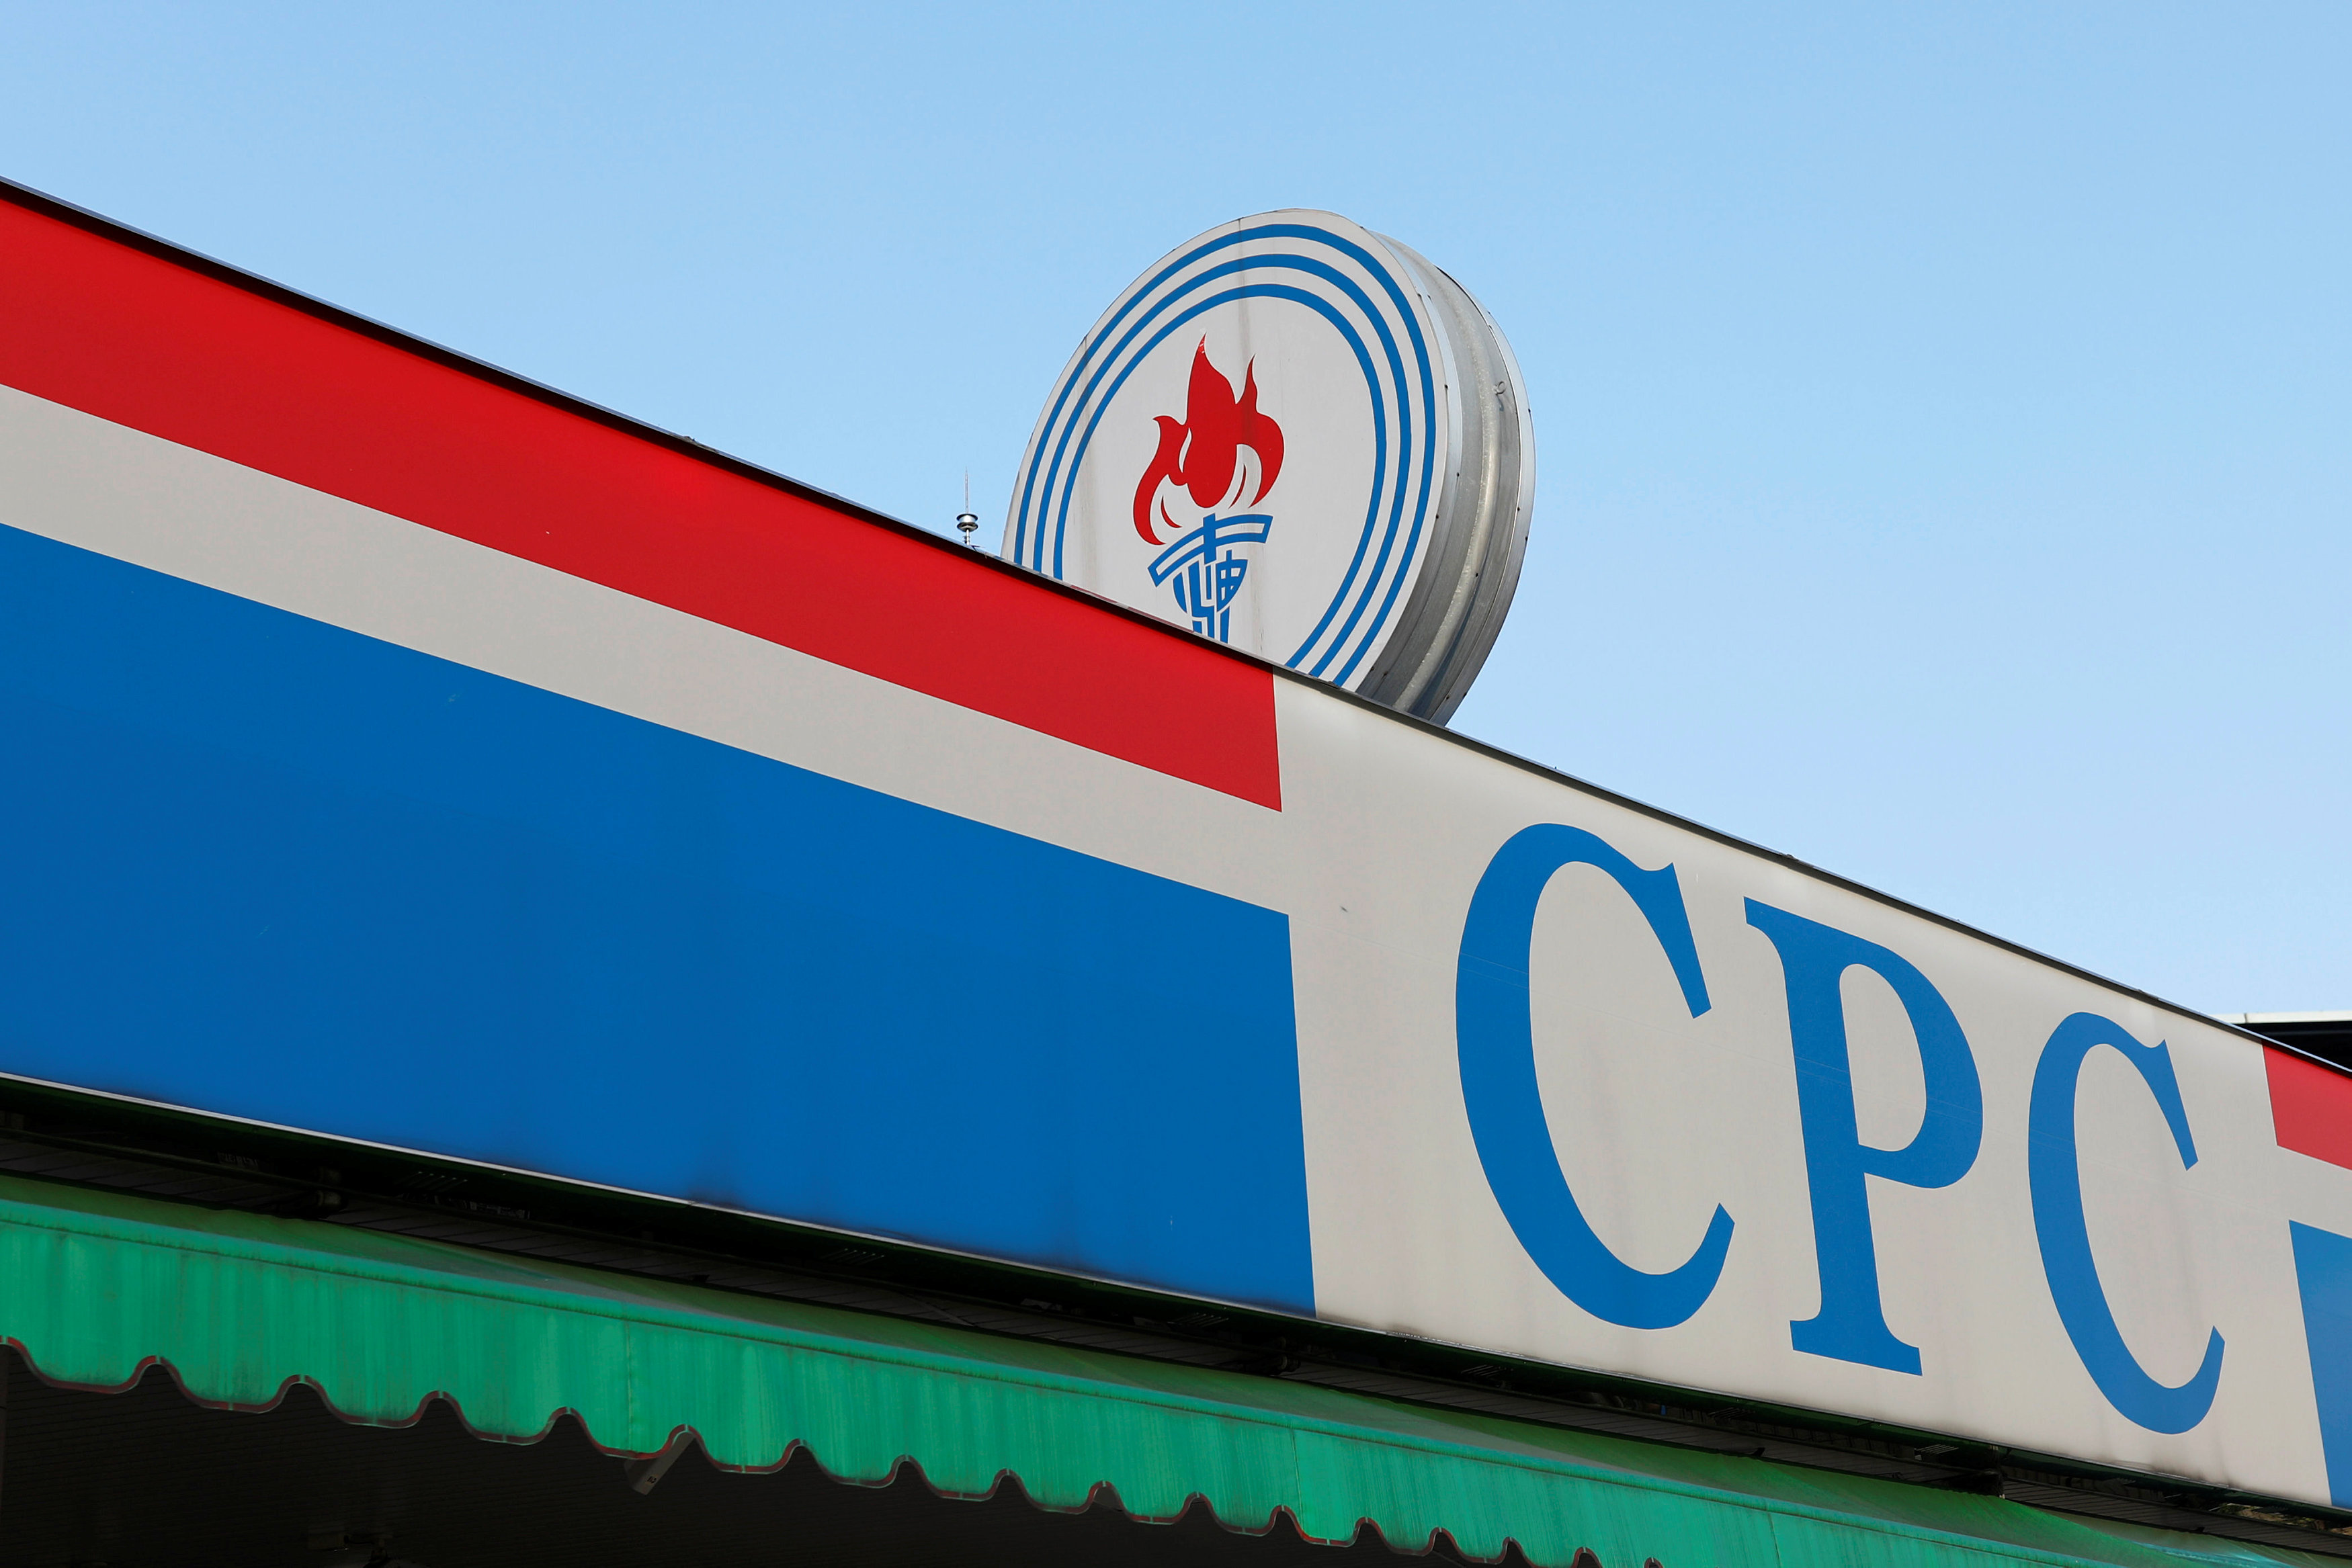 Cheniere signs 25-year LNG sales deal with Taiwan's CPC